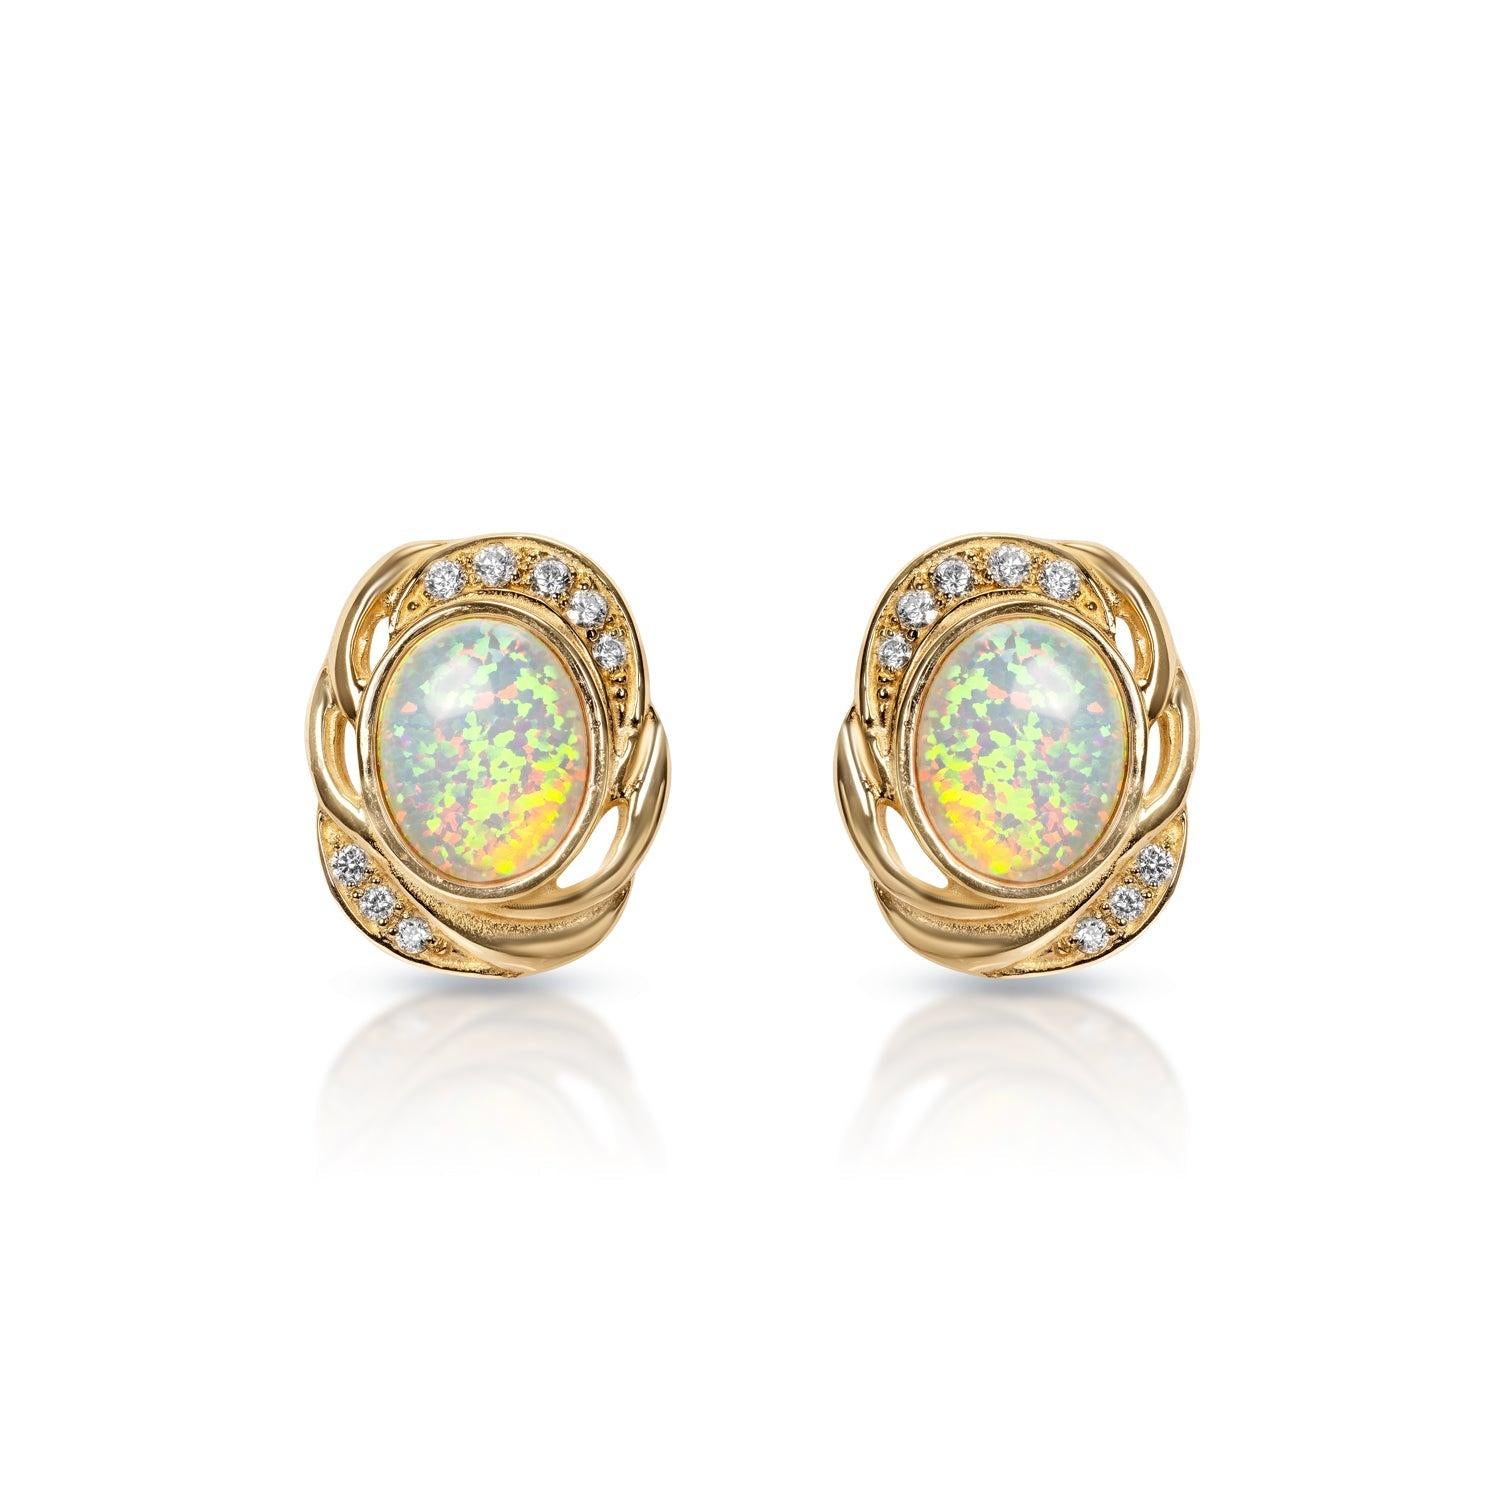 Opal central stone
Diamond button Earrings:

Total Carat Weight: 0.25 Carats
Number of Diamonds: 16 diamonds
Shape: Round Brilliant Cut
Metal: 14 Karat Yellow Gold
Style: Stud Earrings